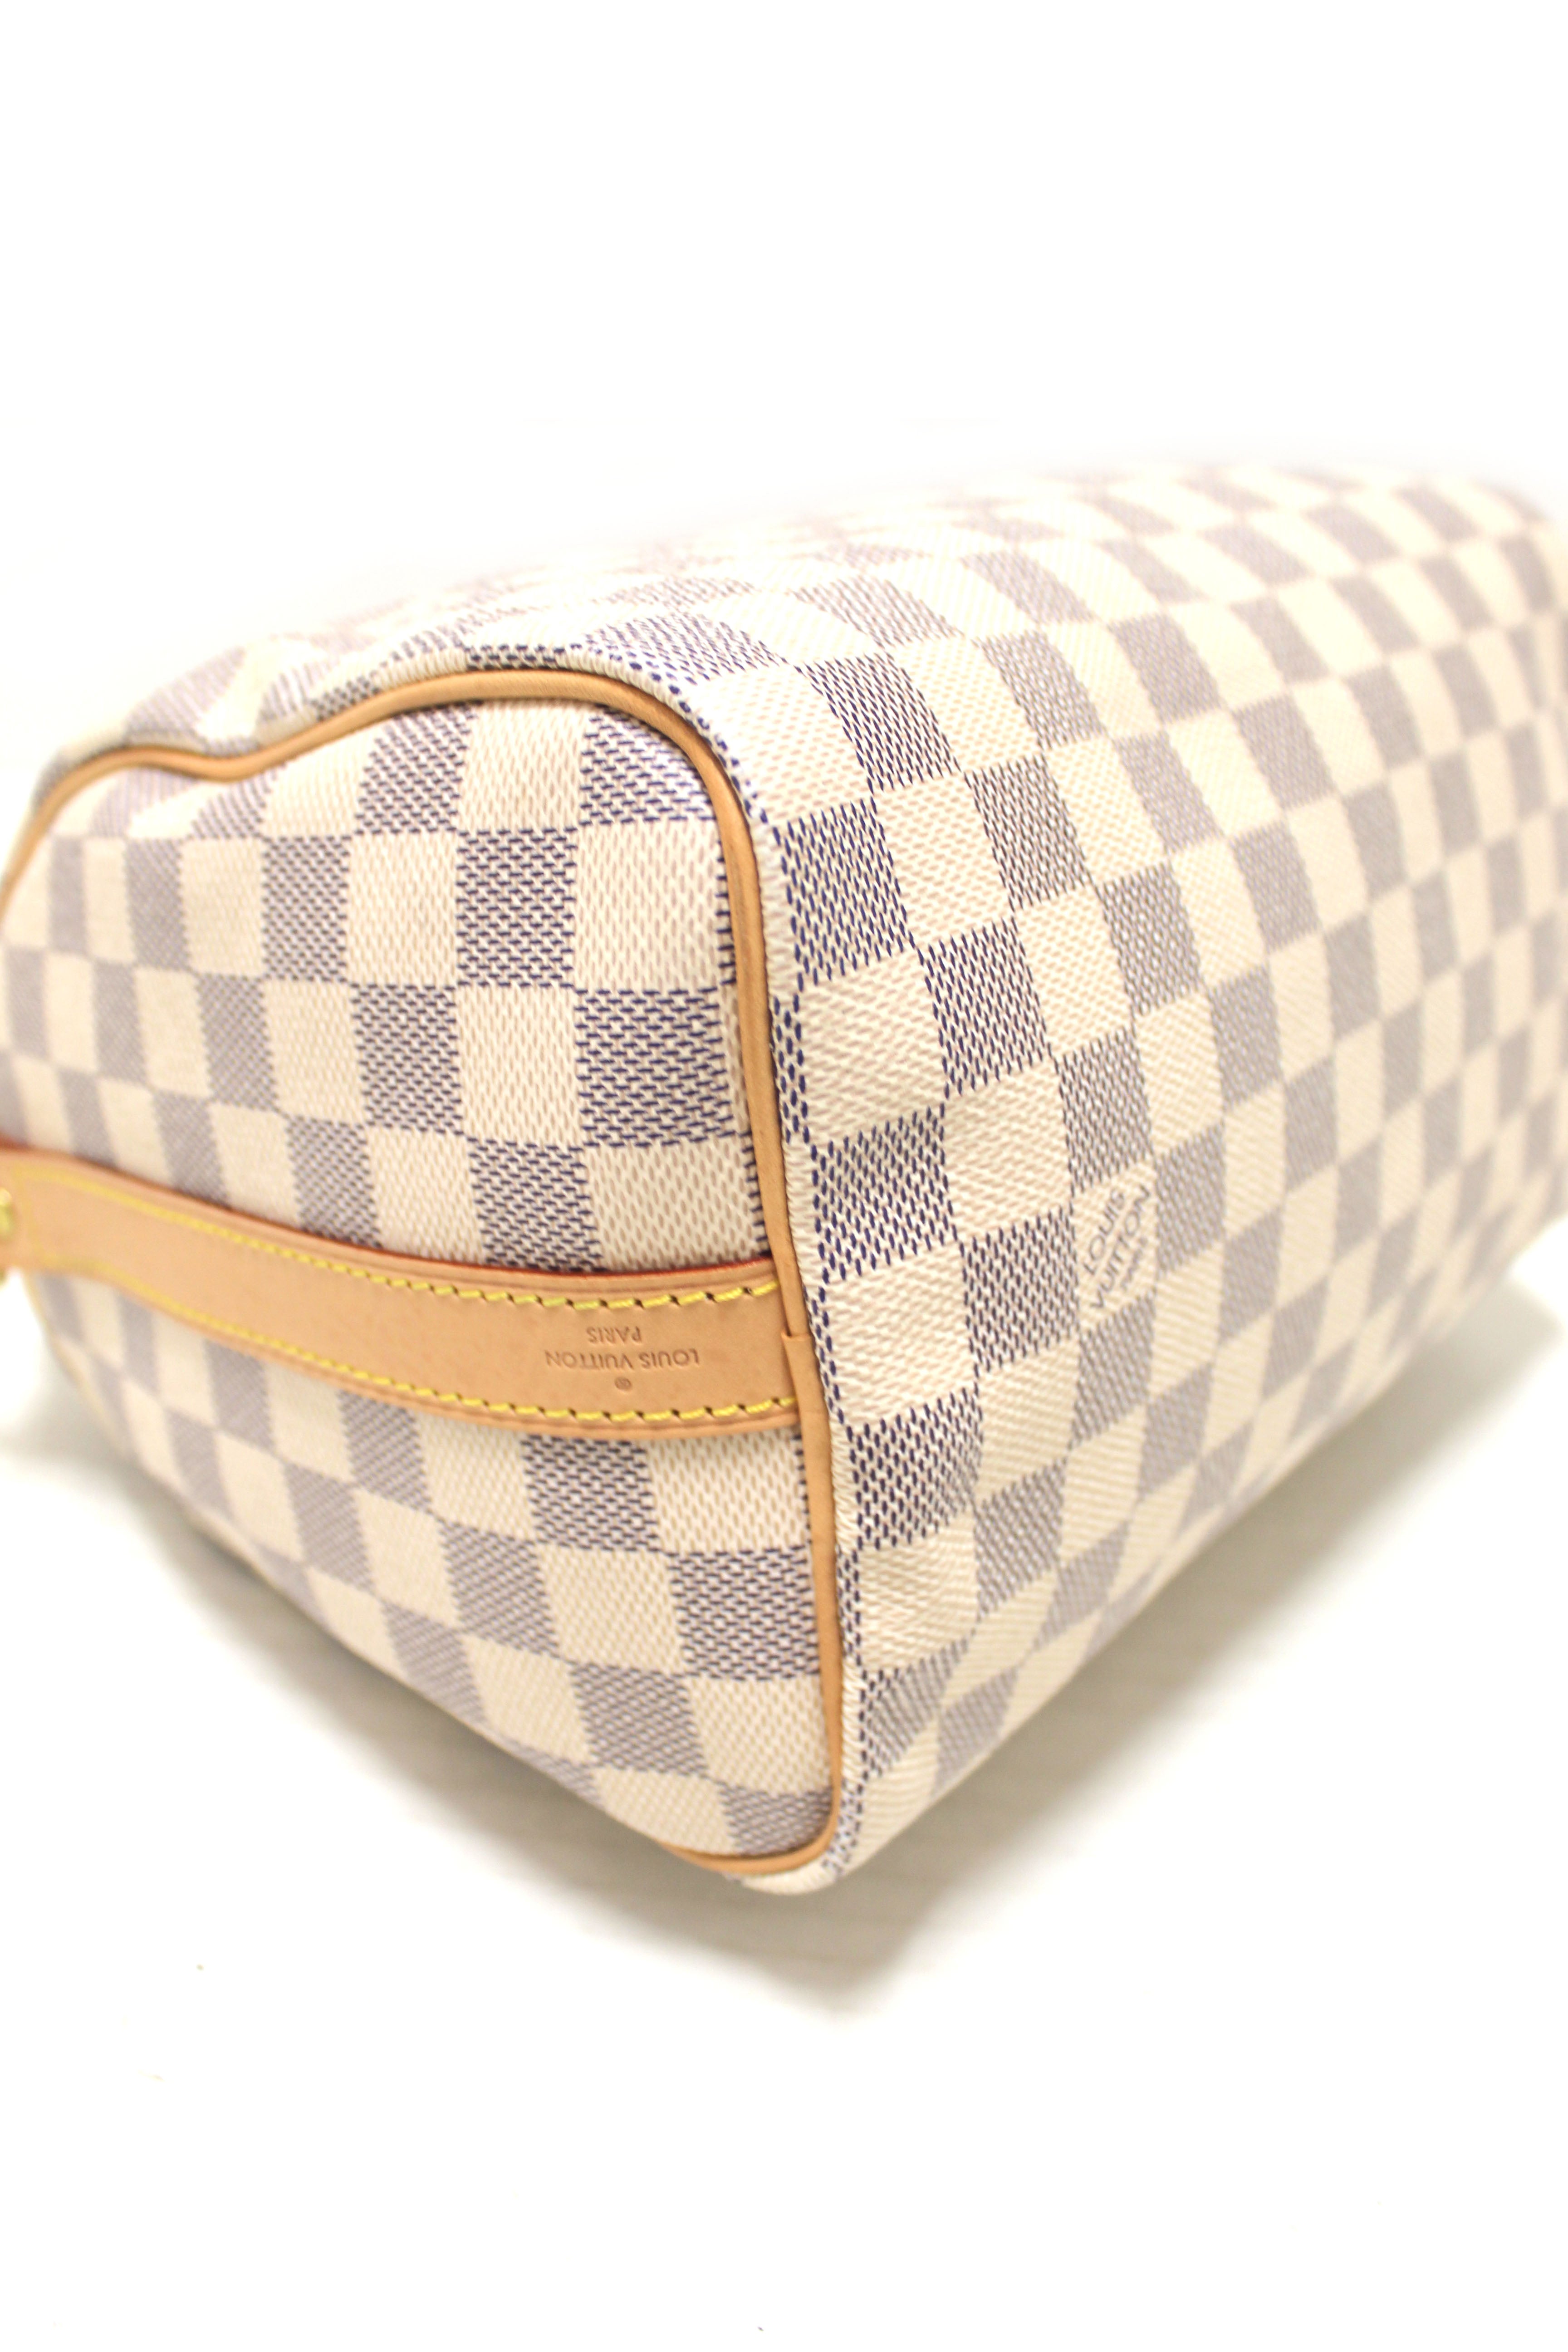 Louis Vuitton Speedy 25 Bandouliere (strap missing) Damier Ebene (RRP –  Addicted to Handbags